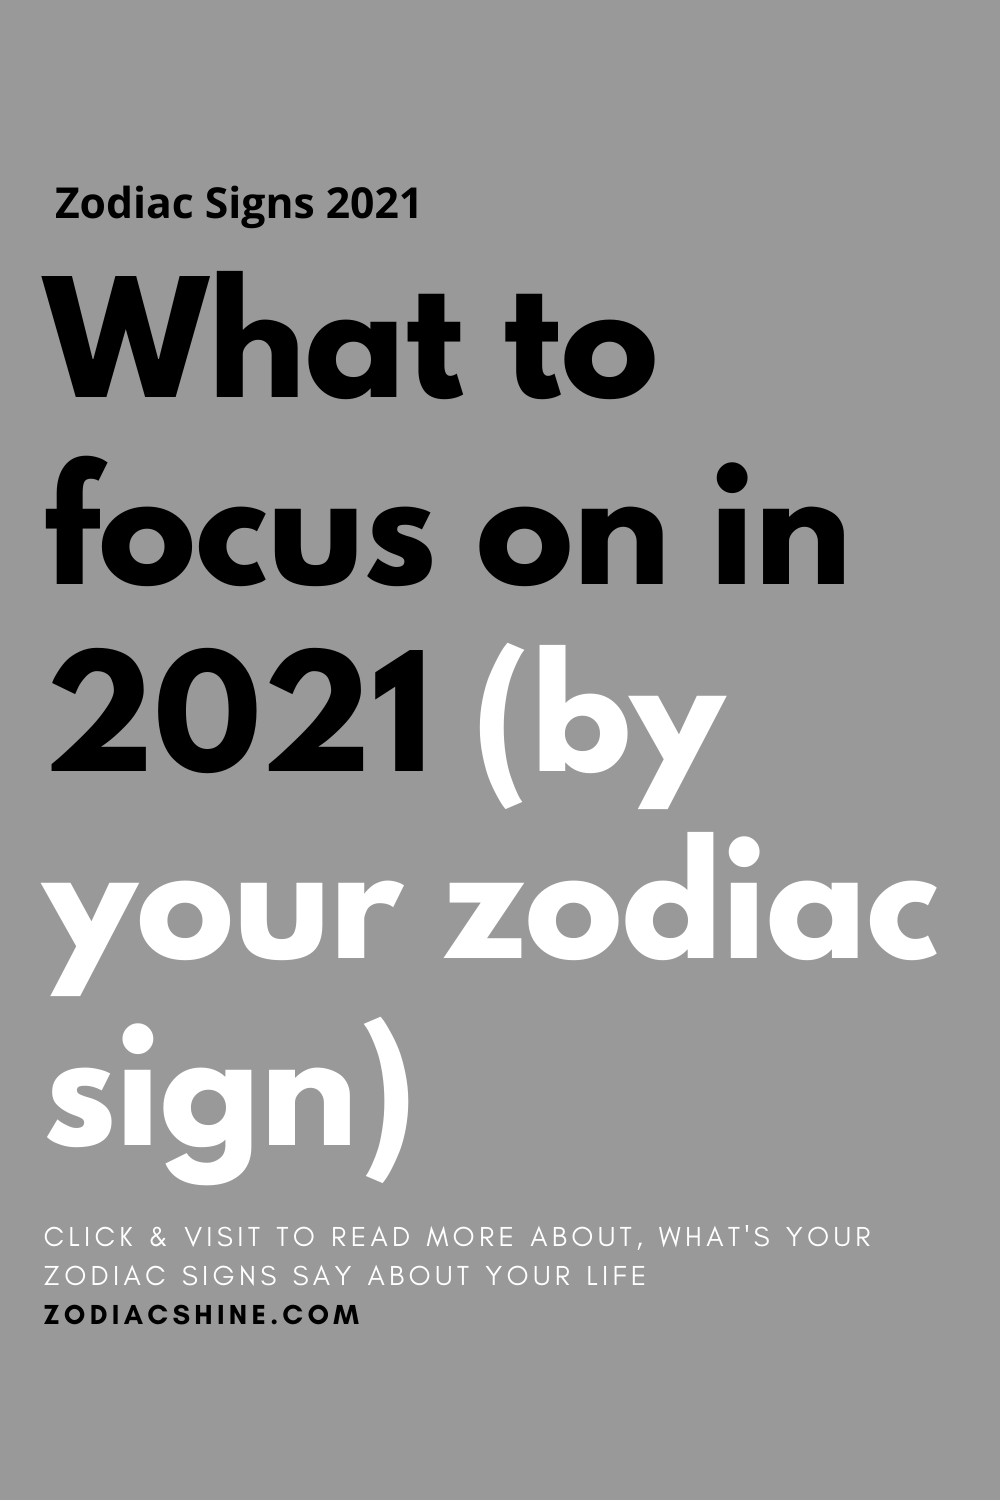 What to focus on in 2021 by your zodiac sign